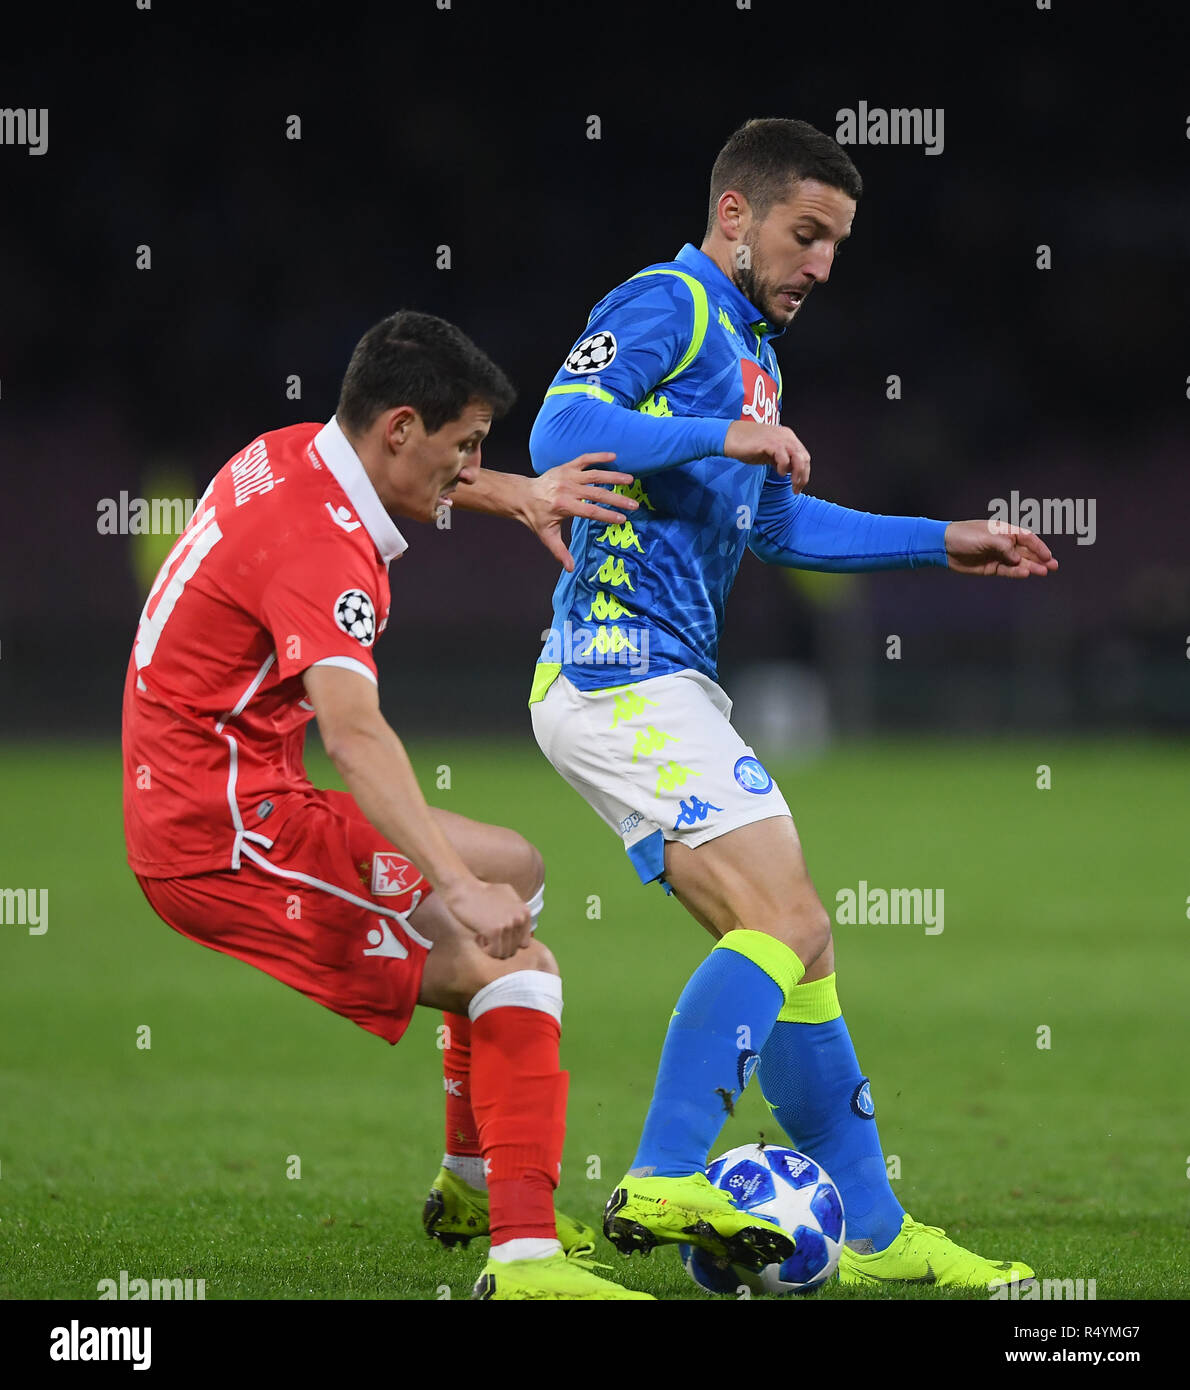 Naples, Italy. 28th Nov, 2018. Napoli's Dries Mertens (R) vies with Red Star's Slavoljub Srnic during the UEFA Champions League Group C match between Napoli and Red Star Belgrade in Naples, Italy, Nov. 28, 2018. Napoli won 3-1. Credit: Alberto Lingria/Xinhua/Alamy Live News Stock Photo